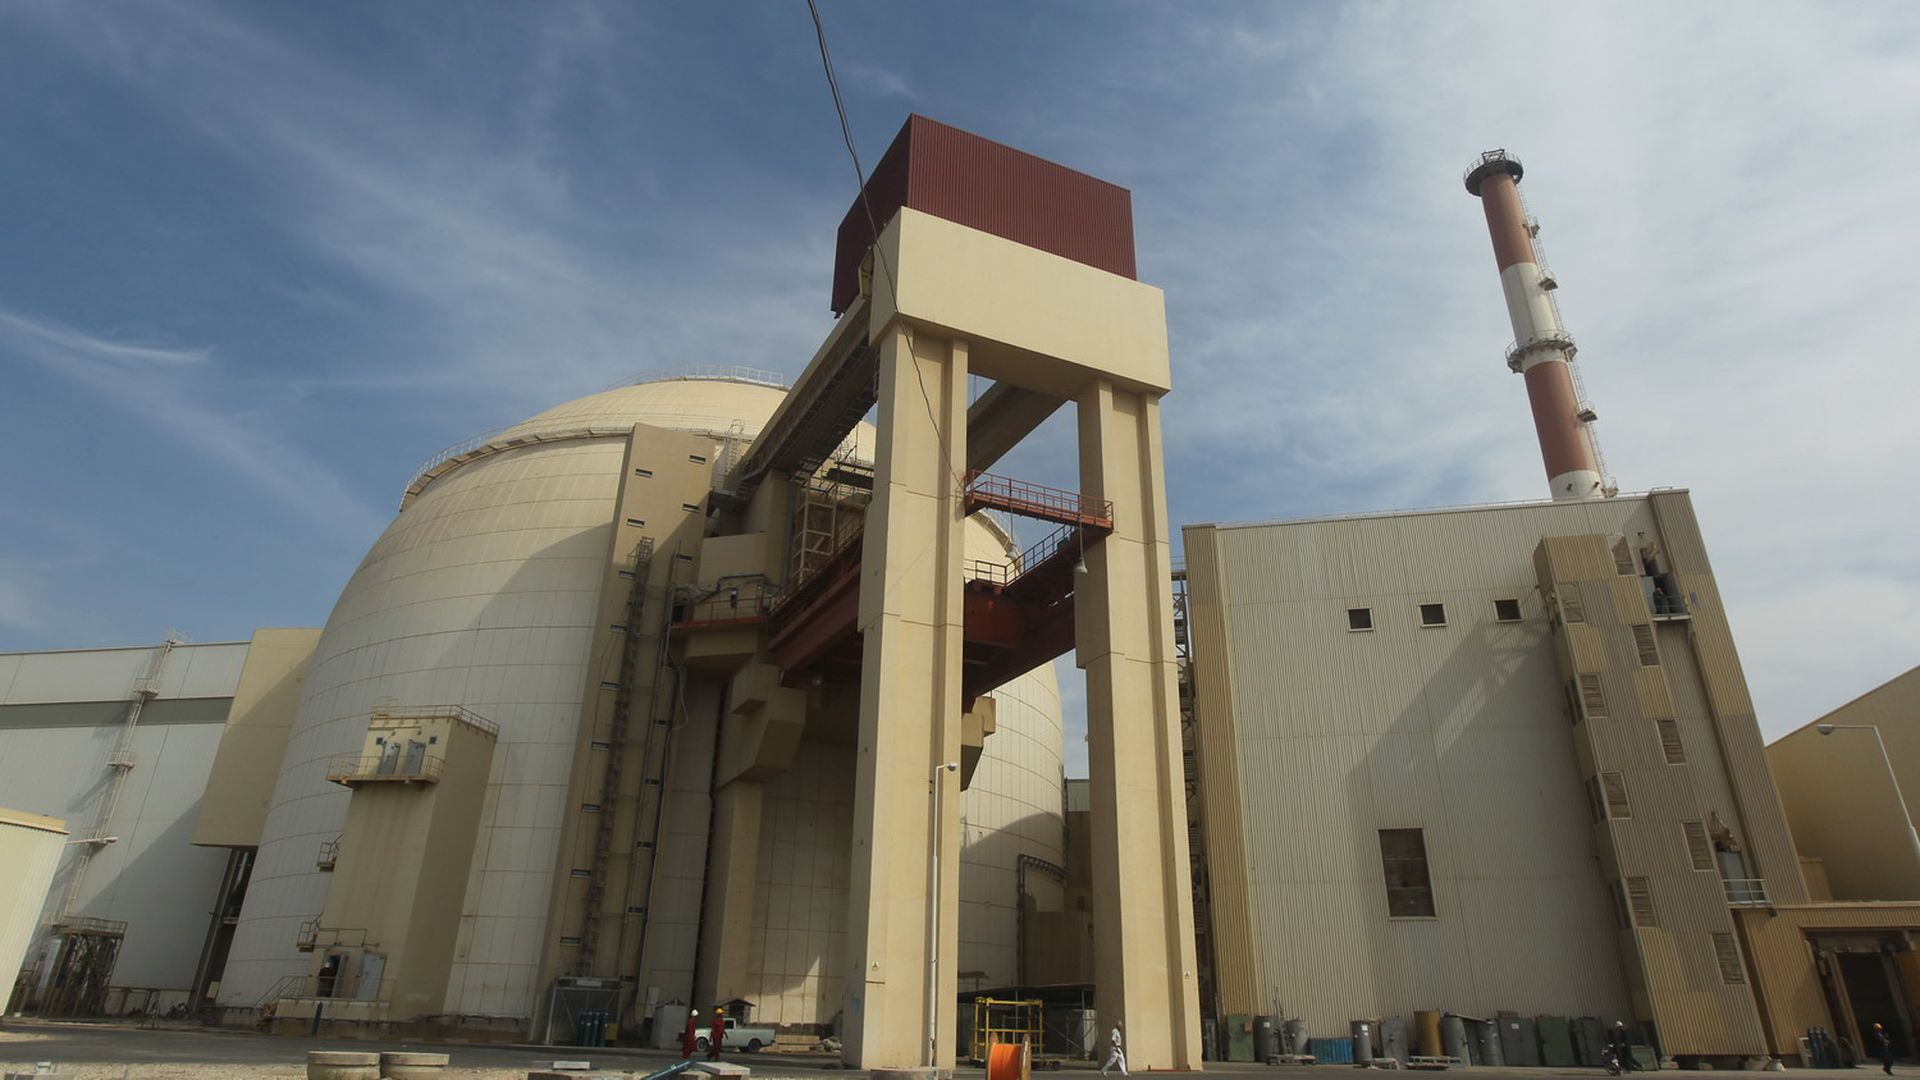 Reactor building of the Bushehr nuclear plant